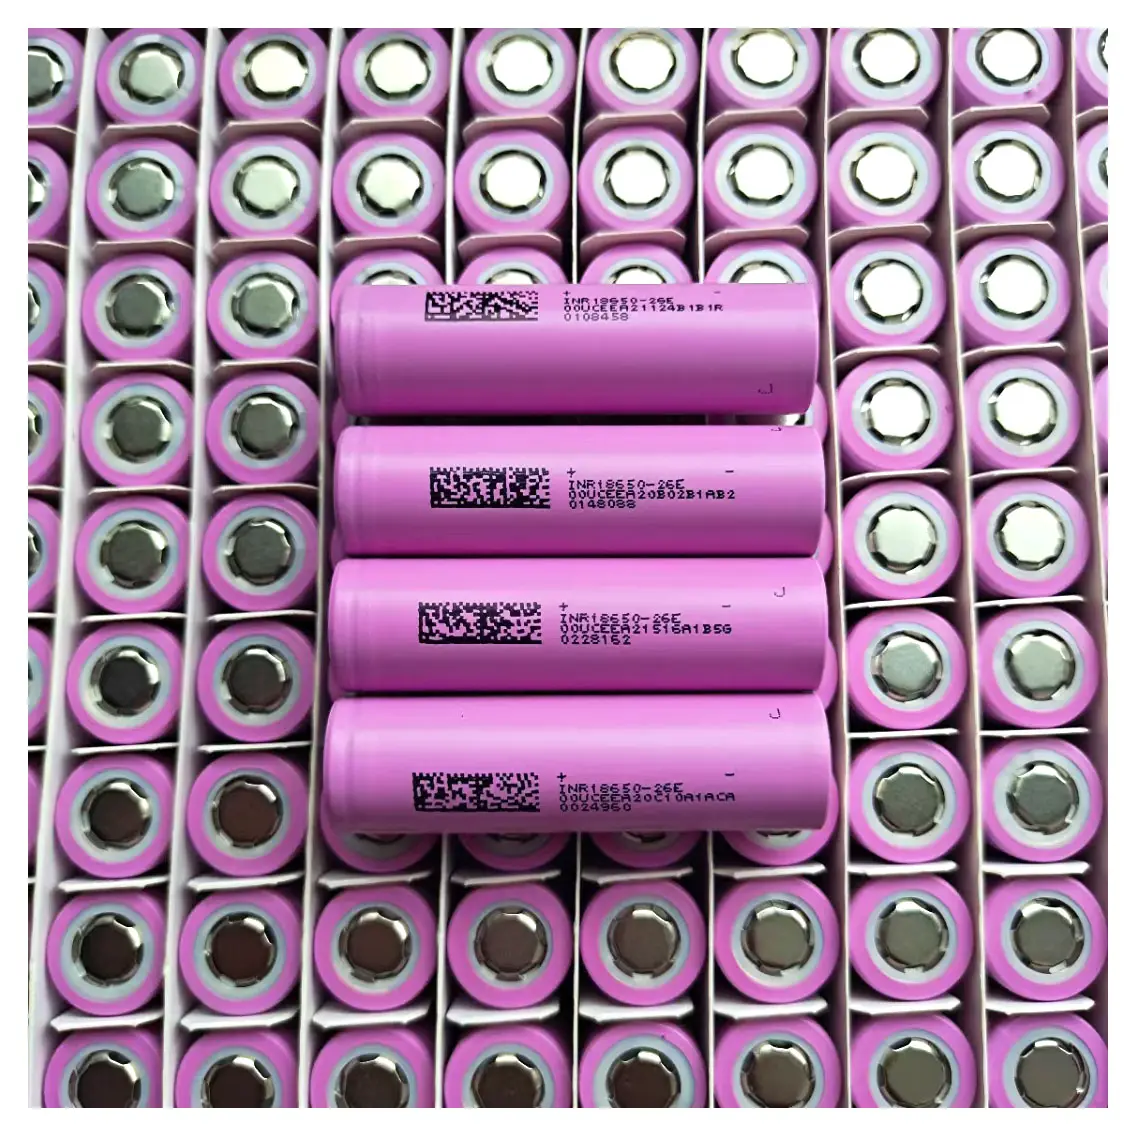 Hot sell best A+ grade 18650 3.7 lithium ion battery 2500mah 2600mah 2850mah 3000mah electric bicycle battery 510 battery